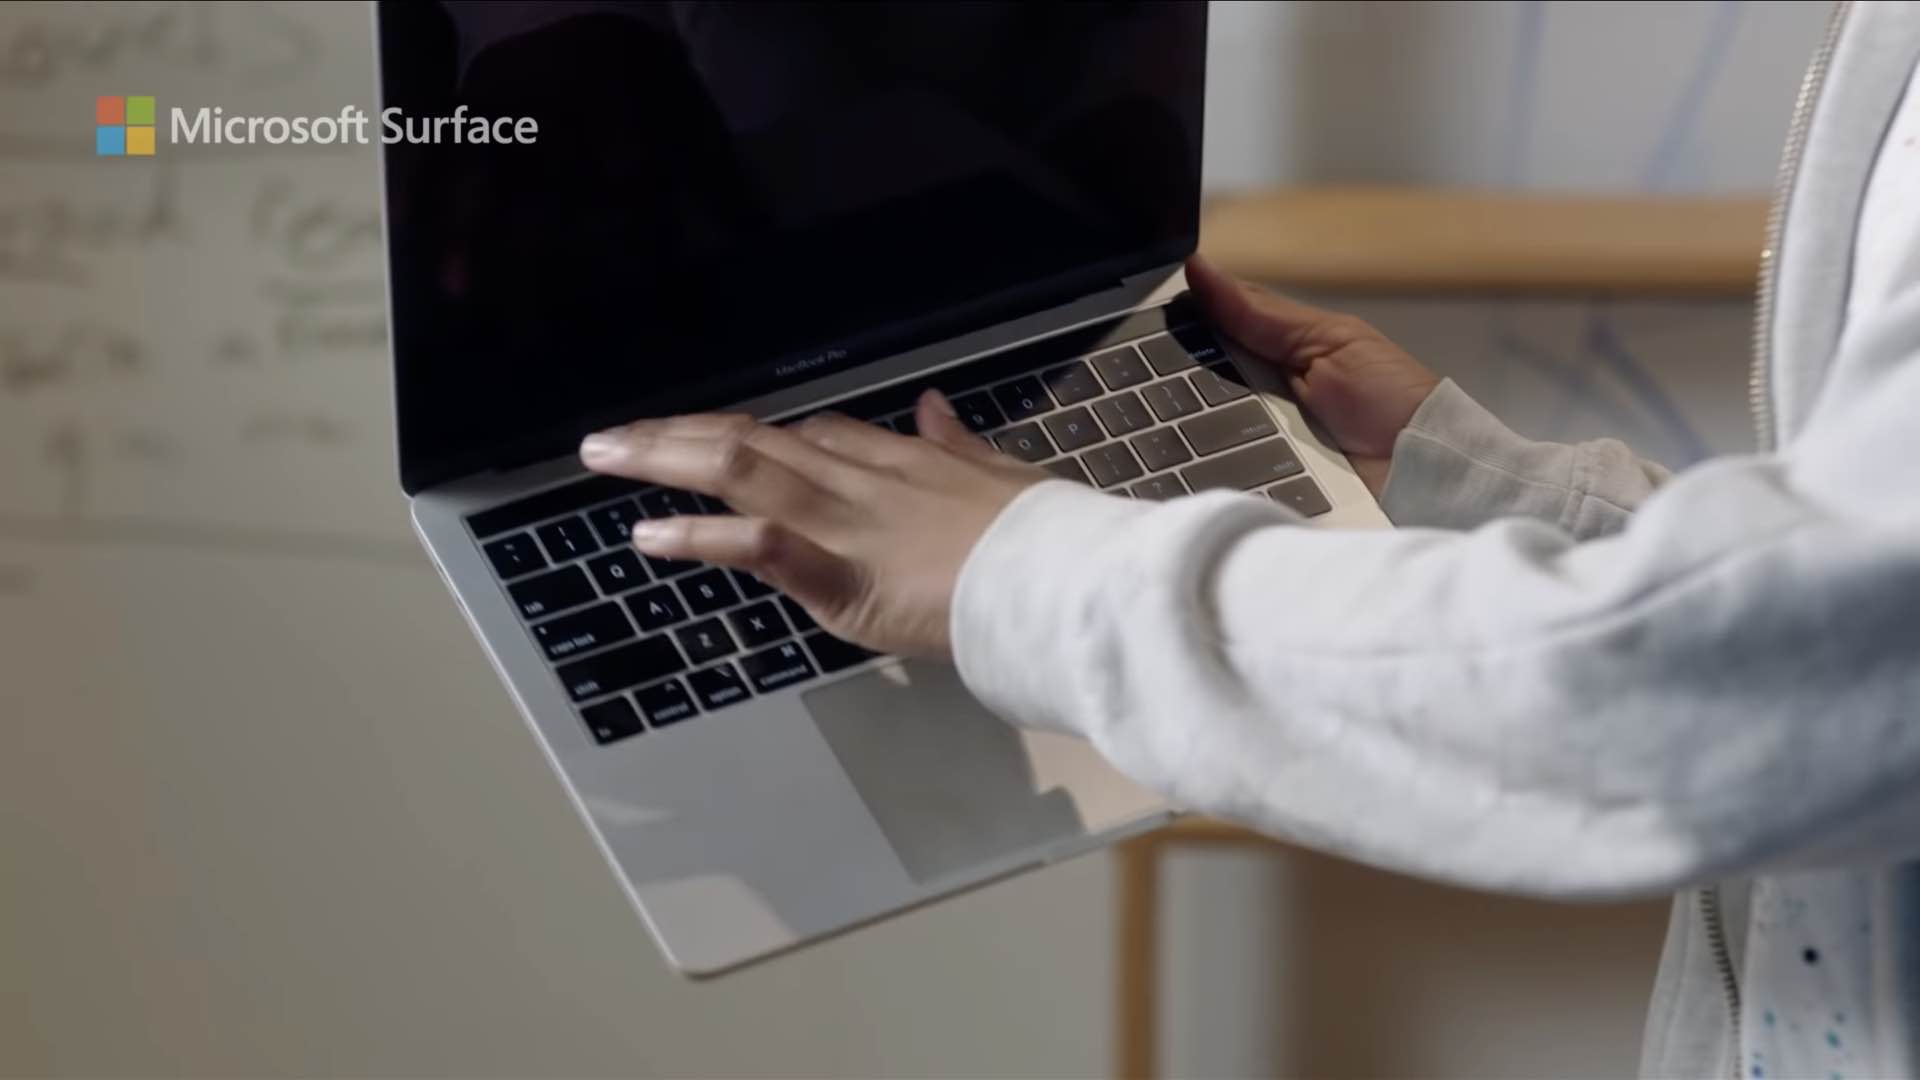 A still from a Microsoft ad comparing the Surface Pro and the MacBook Pro